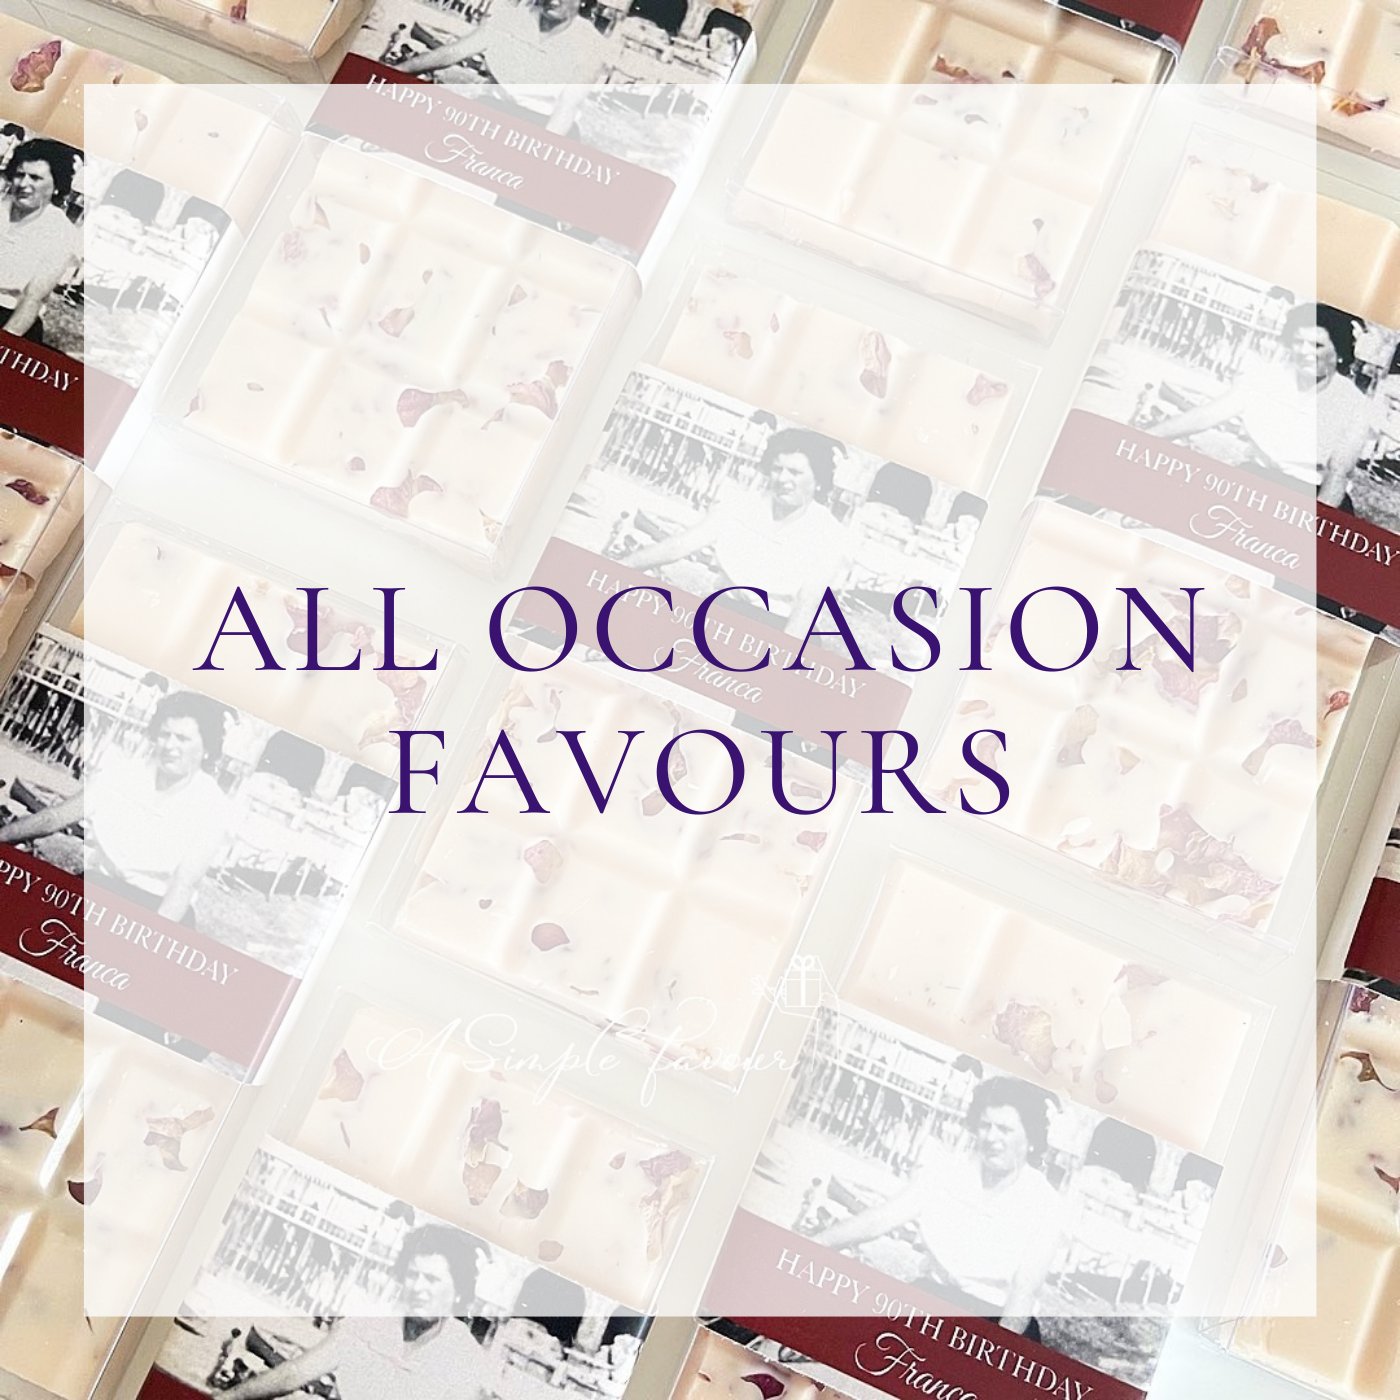 All Occasion Favours